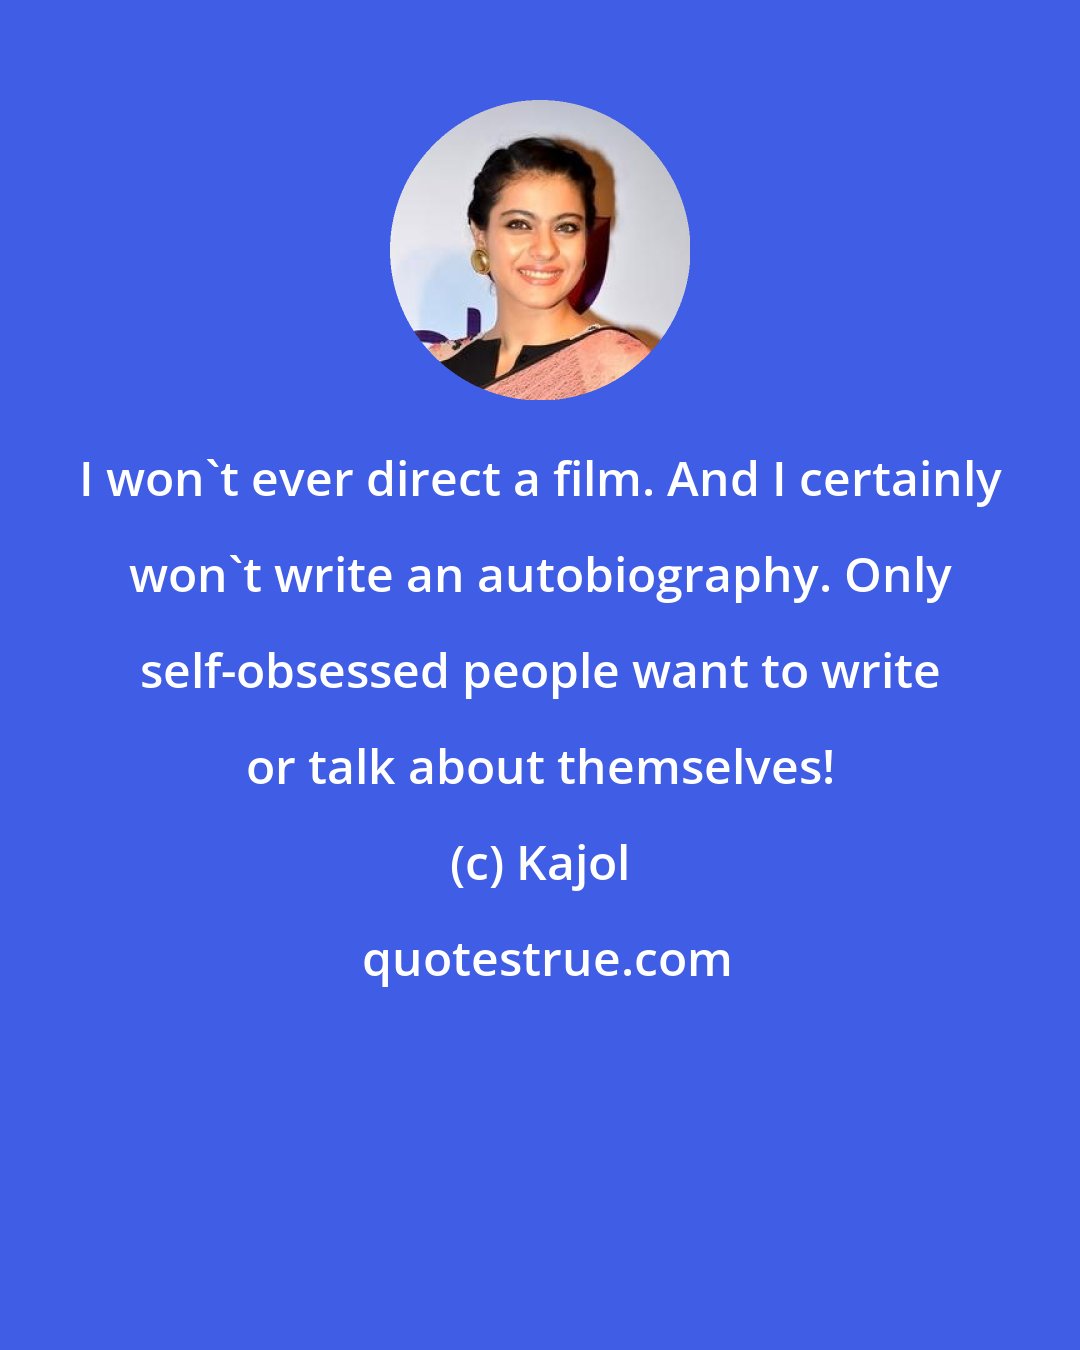 Kajol: I won't ever direct a film. And I certainly won't write an autobiography. Only self-obsessed people want to write or talk about themselves!